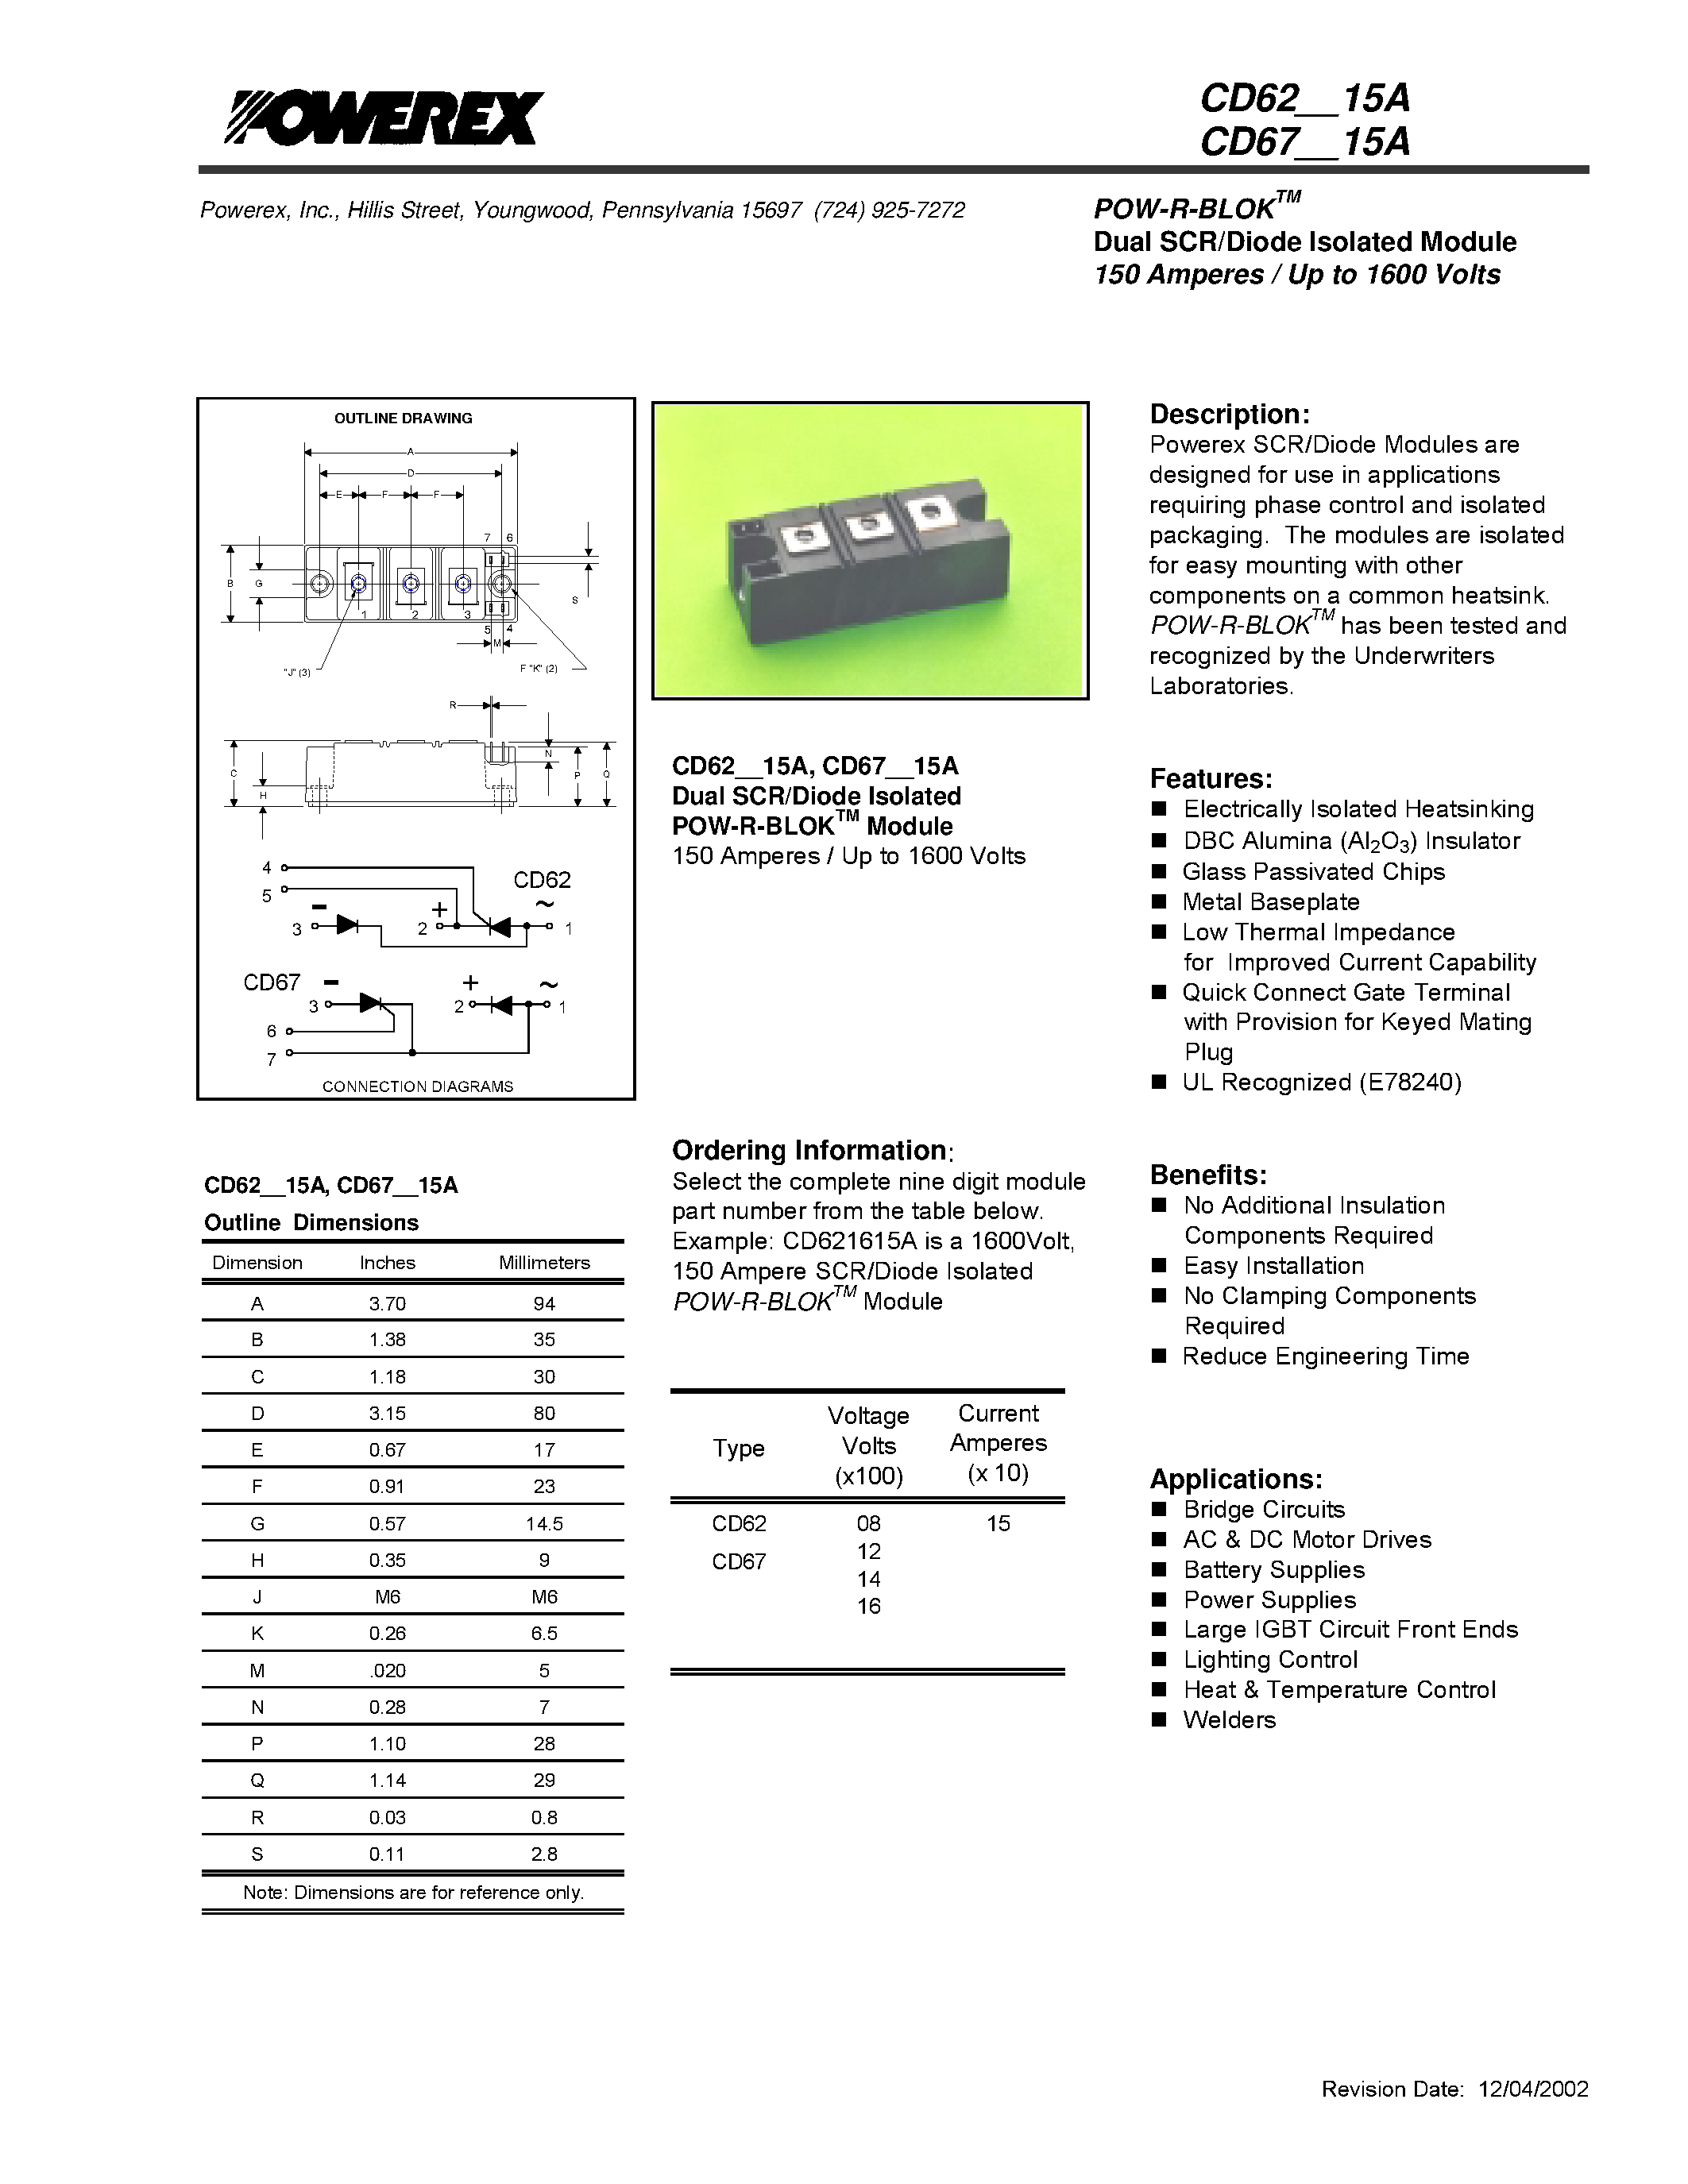 Datasheet CD671415A - POW-R-BLOK Dual SCR/Diode Isolated Module 150 Amperes / Up to 1600 Volts page 1